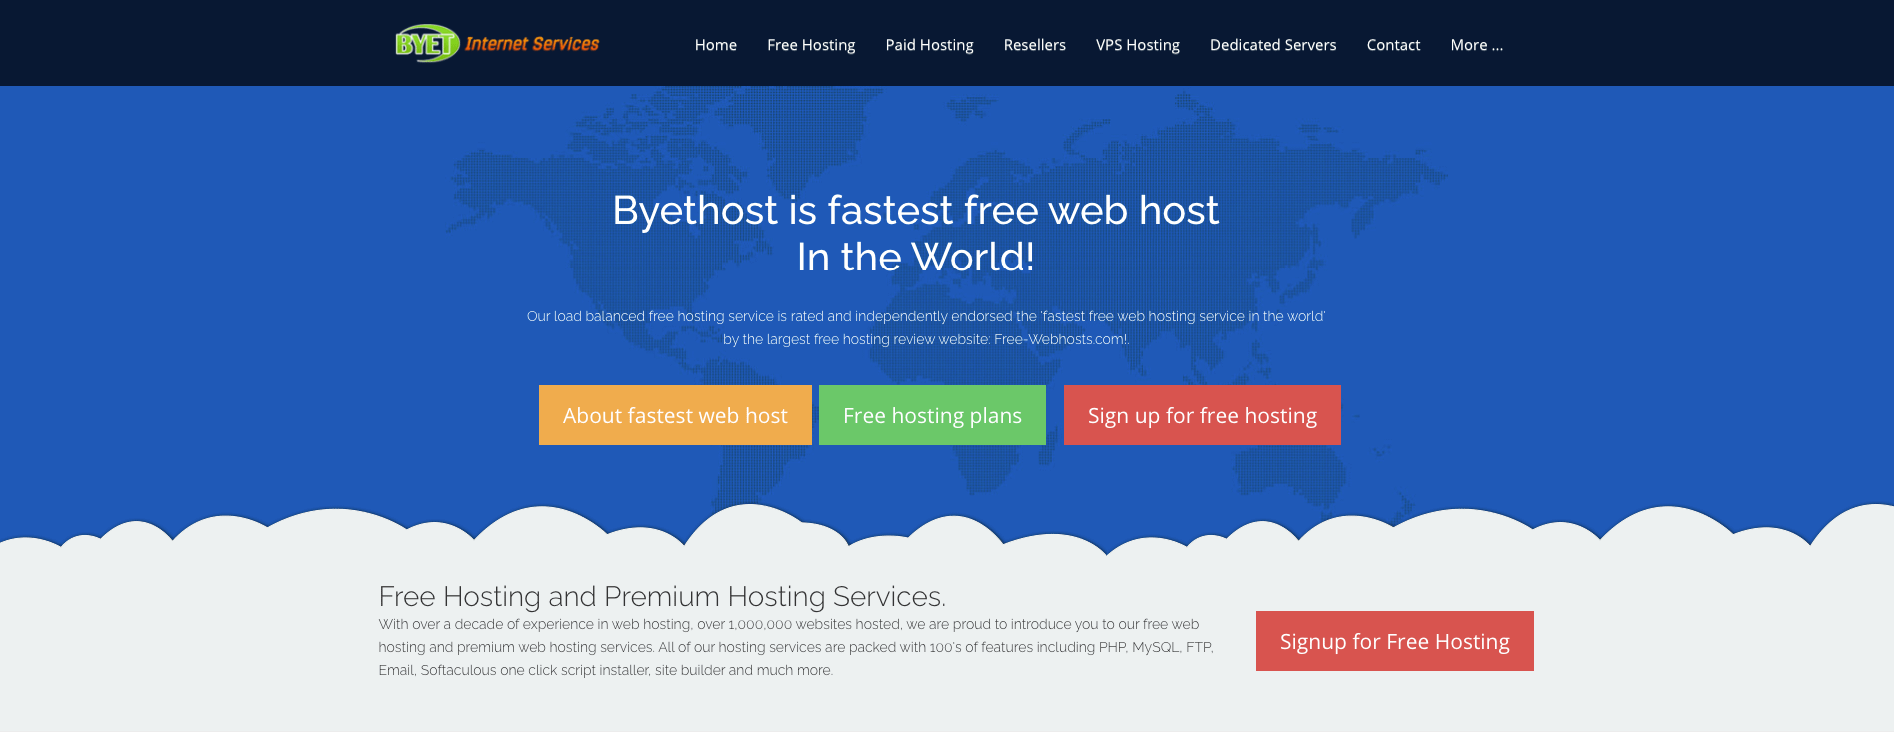 ByetHost offers free web hosting.